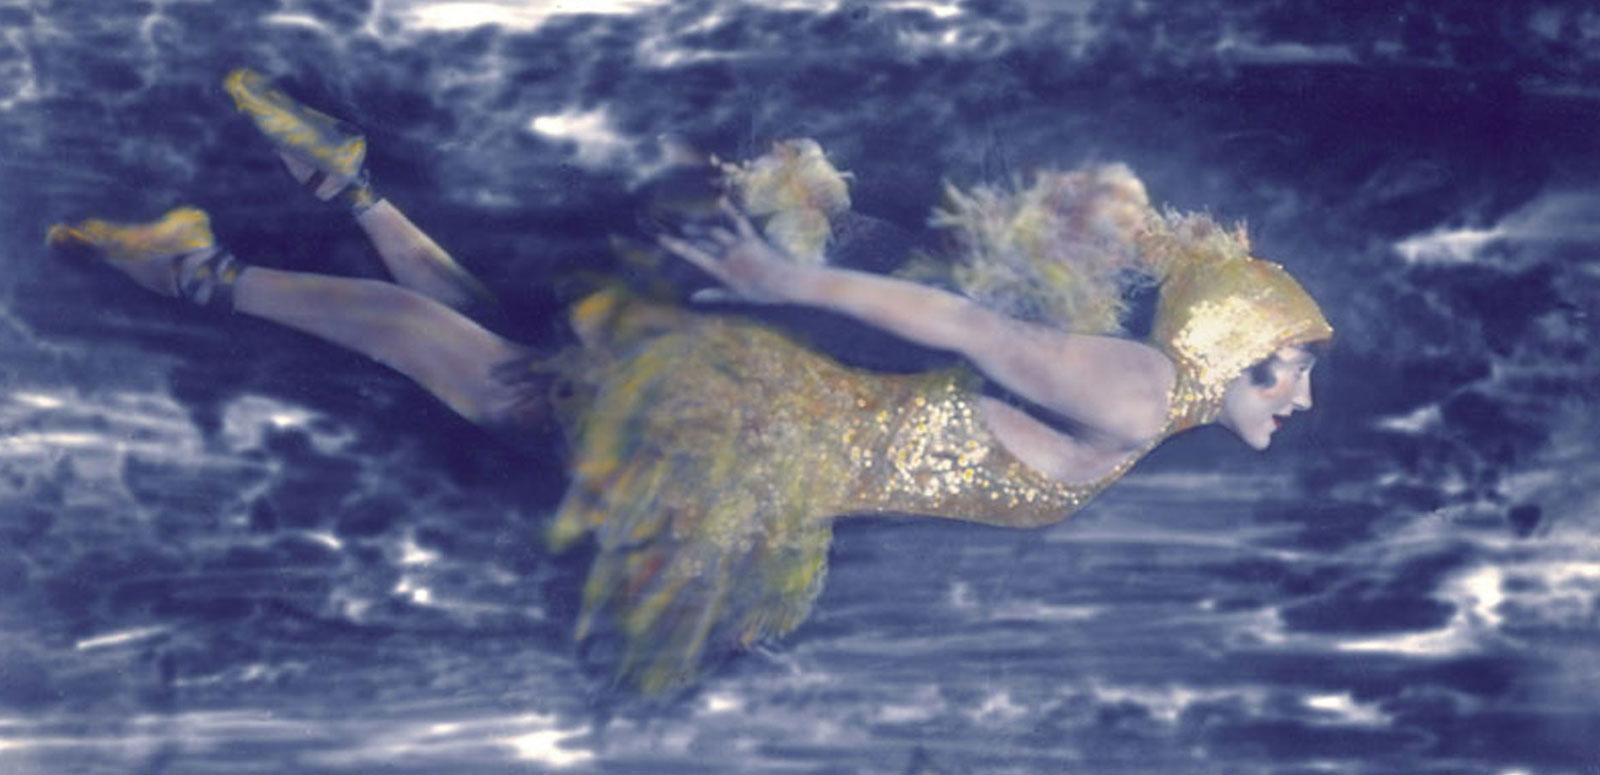 Hand-tinted photograph of Annette Kellerman swimming underwater wearing an elaborate costume including ballet slippers and head-dress.